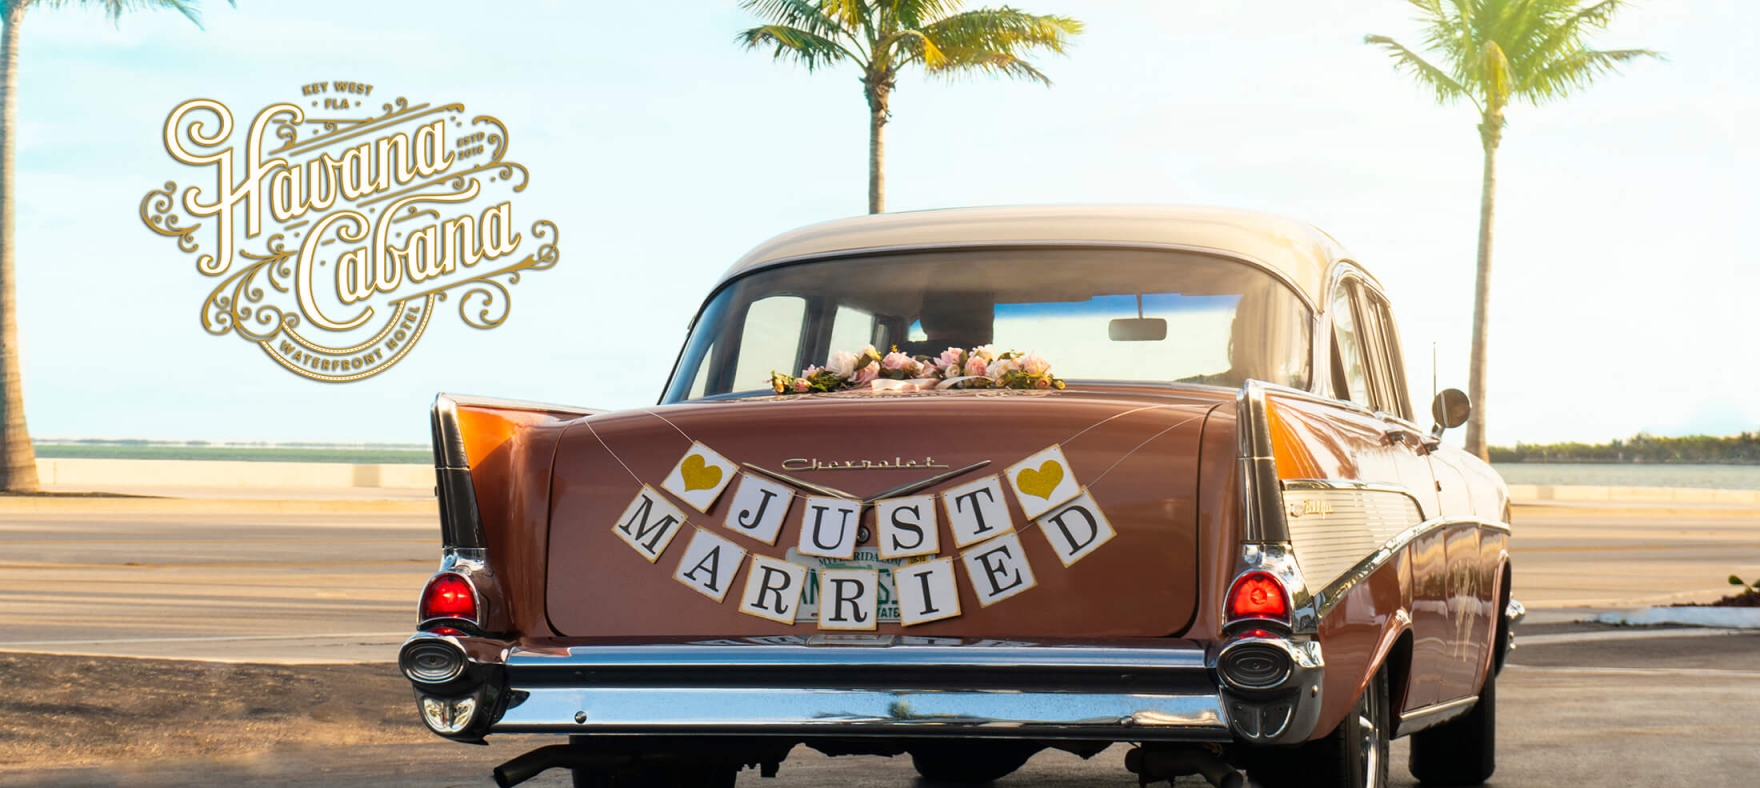 The back of a classic Chevrolet decorated with Just Married car banner and flowers